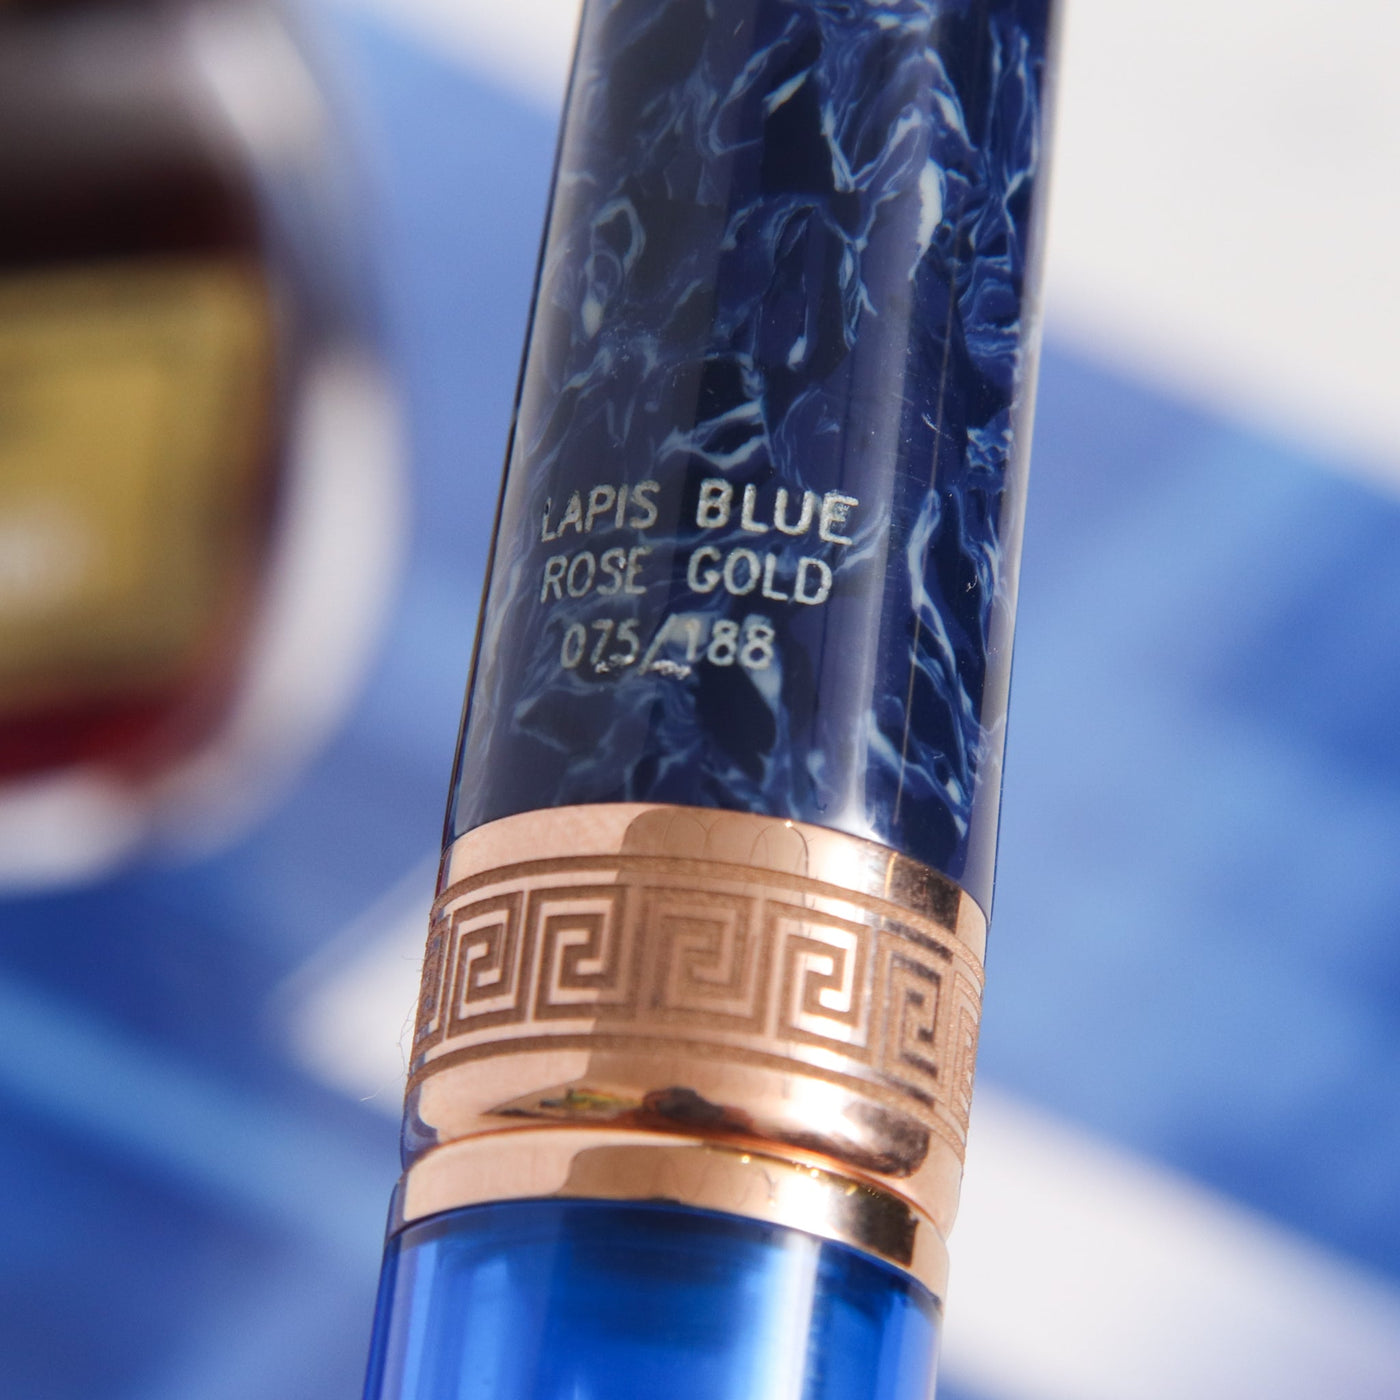 Delta Lapis Blue Celluloid Rose Gold Fountain Pen Limited Edition Number